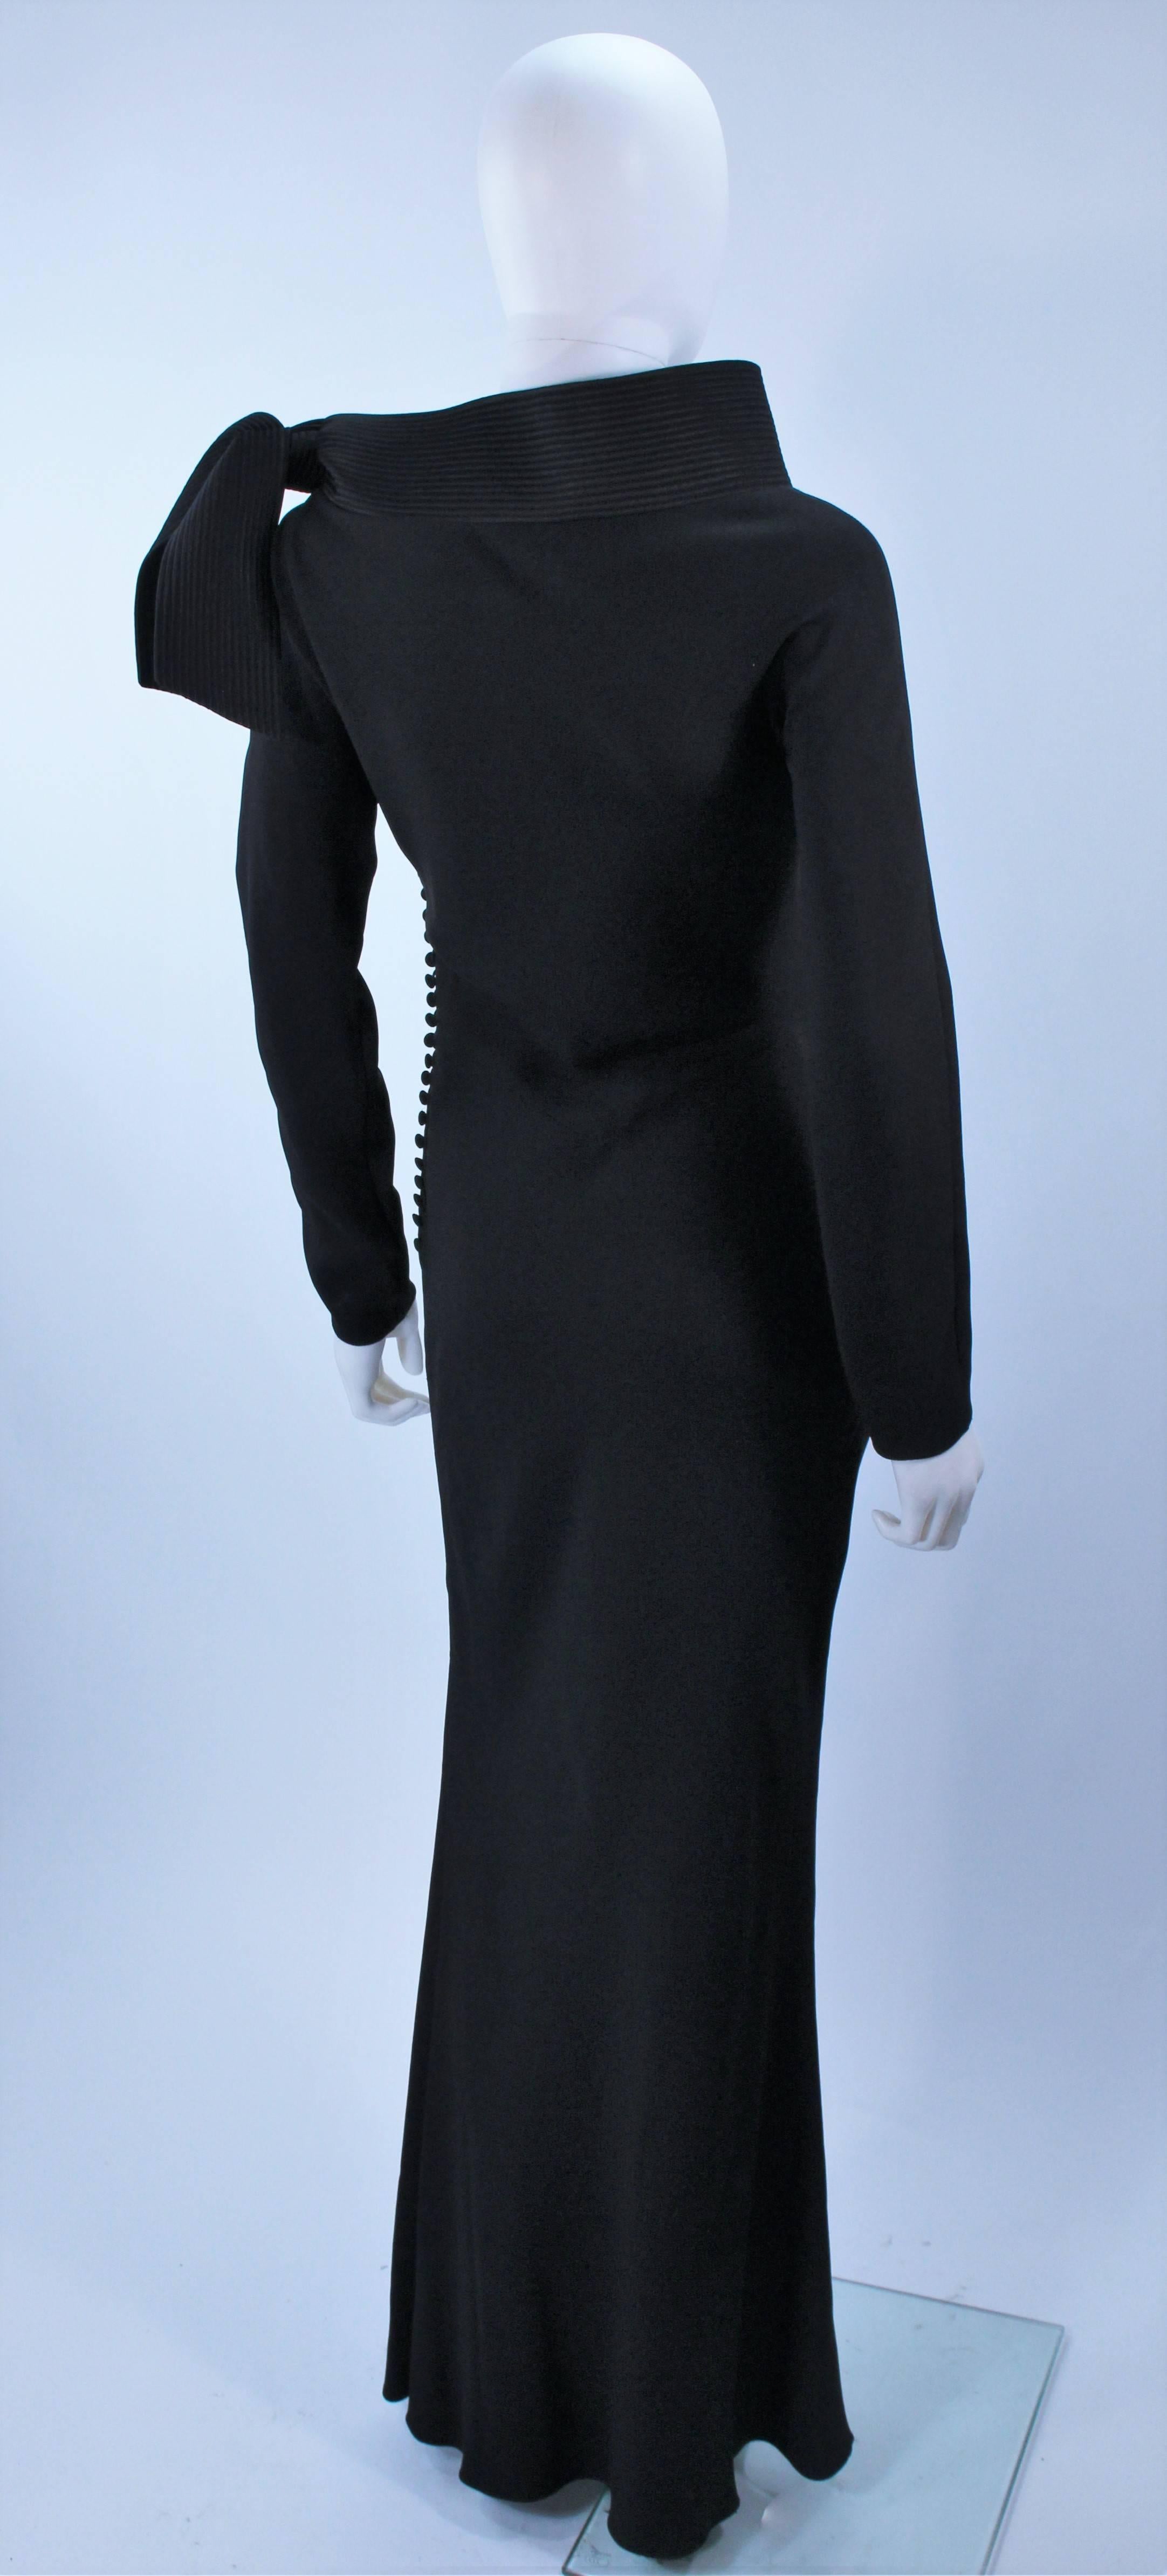 JOHN GALLIANO For CHRISTIAN DIOR Black Gown with Collar Detail Size 38 6 4